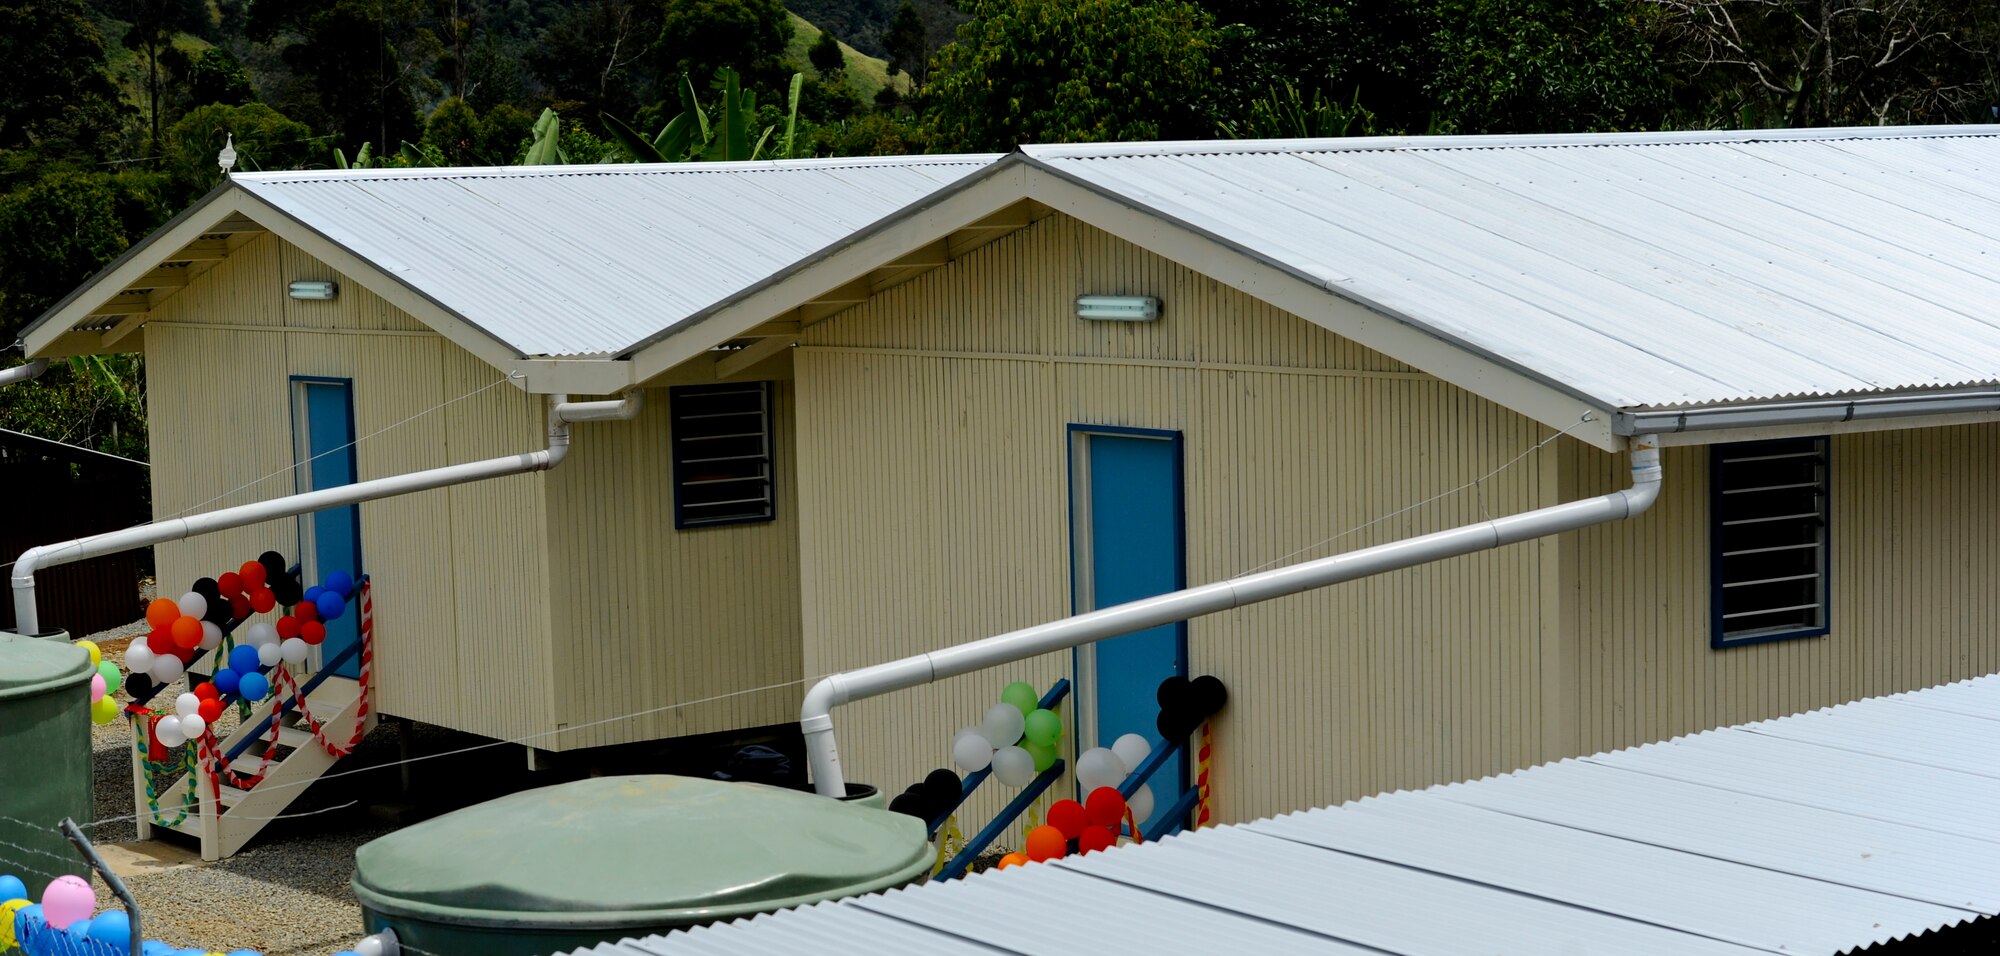 Construction for Pacific Unity 14-8 began in Mount Hagen, Papua New Guinea, in August 2014. For the operation, members of the Hawaii Air National Guard’s 154th Wing Civil Engineer Squadron constructed two new dormitories to be used for female students at Togoba Secondary School. PACUNITY helps cultivate common bonds and fosters goodwill between the U.S. and regional nations through multi-lateral humanitarian assistance and civil military operations.  (U.S. Air Force photo by Tech. Sgt. Terri Paden/Released)                               